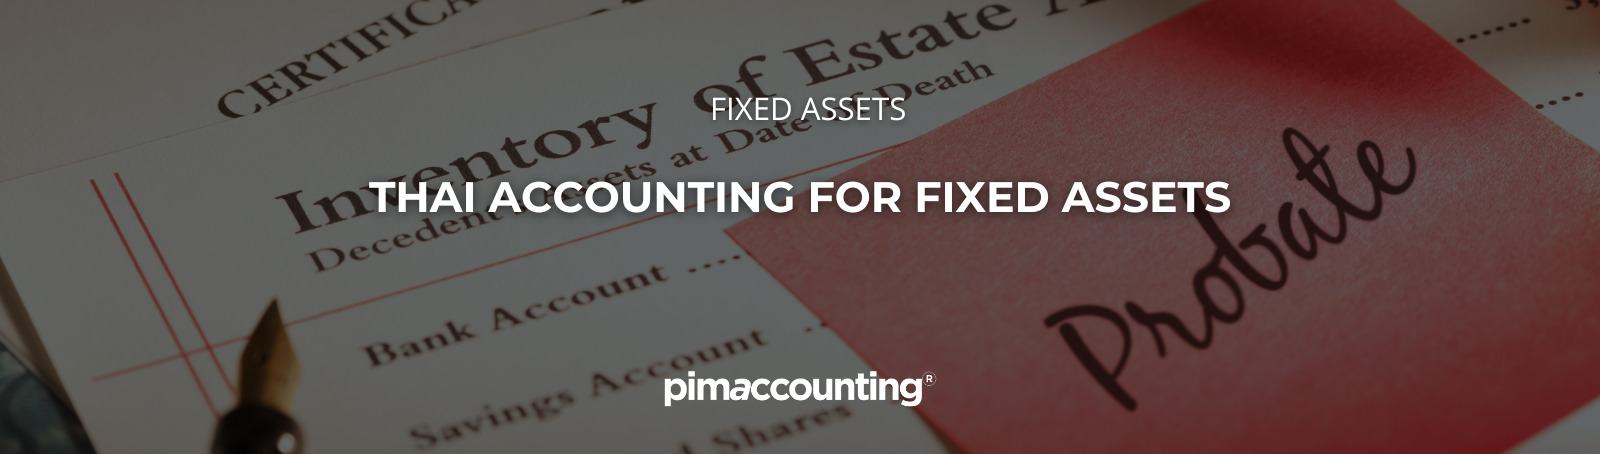 Thai Accounting for Fixed Assets - Pimaccounting